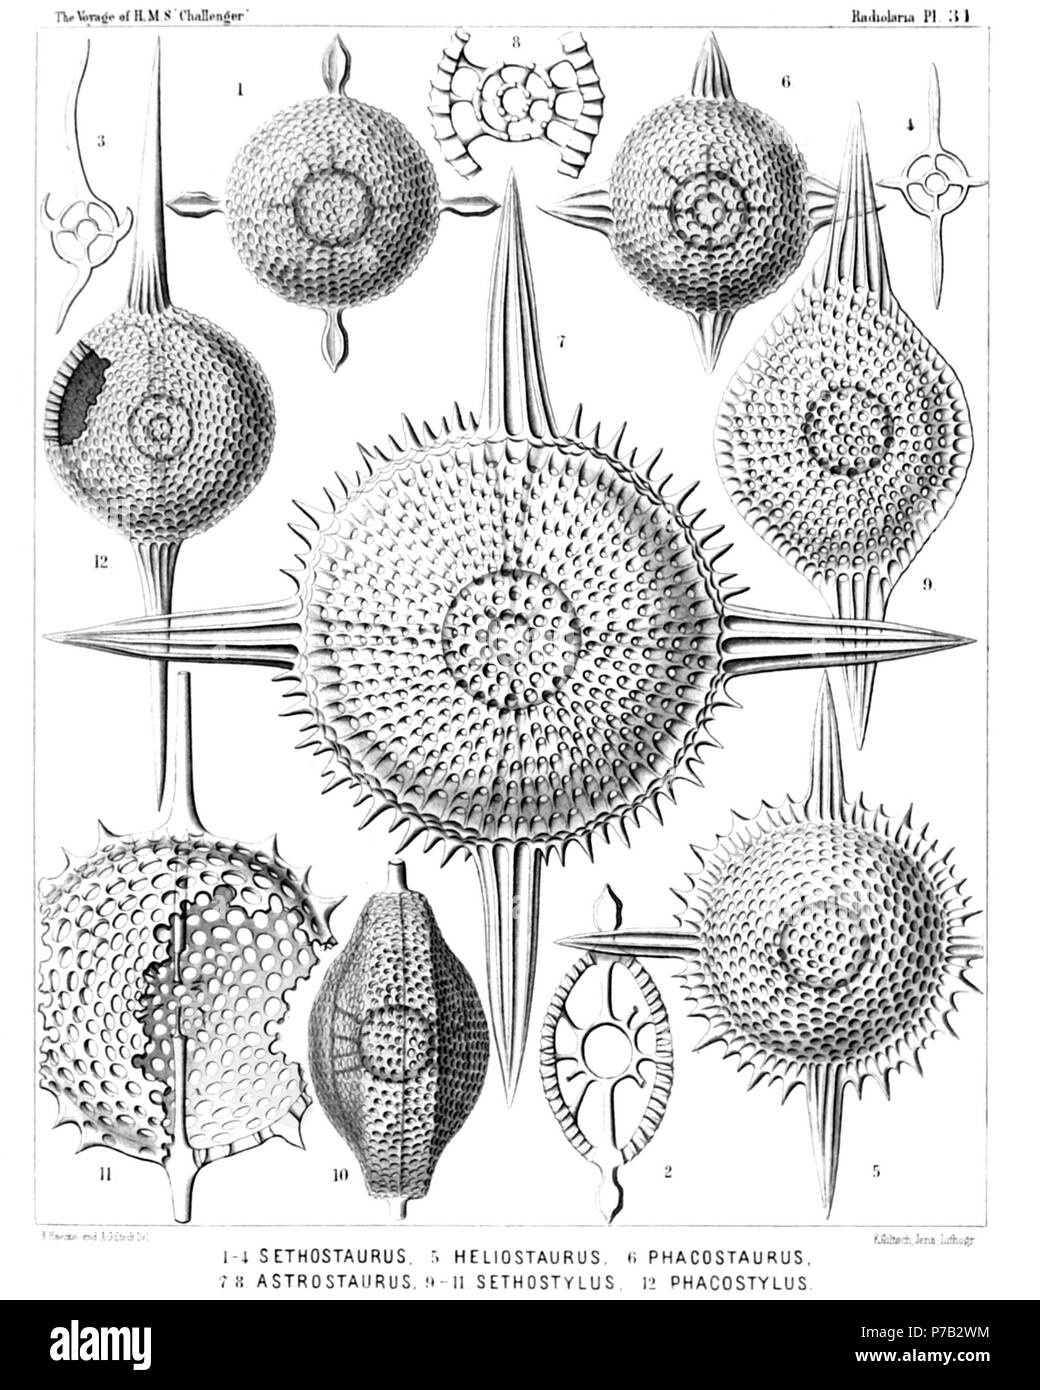 English: Illustration from Report on the Radiolaria collected by H.M.S. Challenger during the years 1873-1876. Part III. Original description follows:  Plate 31. Cenodiscida et Phacodiscida.  Diam.  Fig. 1. Sethostaurus orthostaurus, n. sp., × 300  Fig. 2. Sethostaurus orthostaurus, n. sp., × 300  Vertical section through the centrum.  Fig. 3. Sethostaurus recurvatus, n. sp., × 100  Optical section through the equatorial plane.  Fig. 4. Sethostaurus rhombostaurus, n. sp., × 100  Optical section through the equatorial plane.  Fig. 5. Sethostaurus cruciatus, n. sp. (vel Heliostaurus cruciatus),  Stock Photo